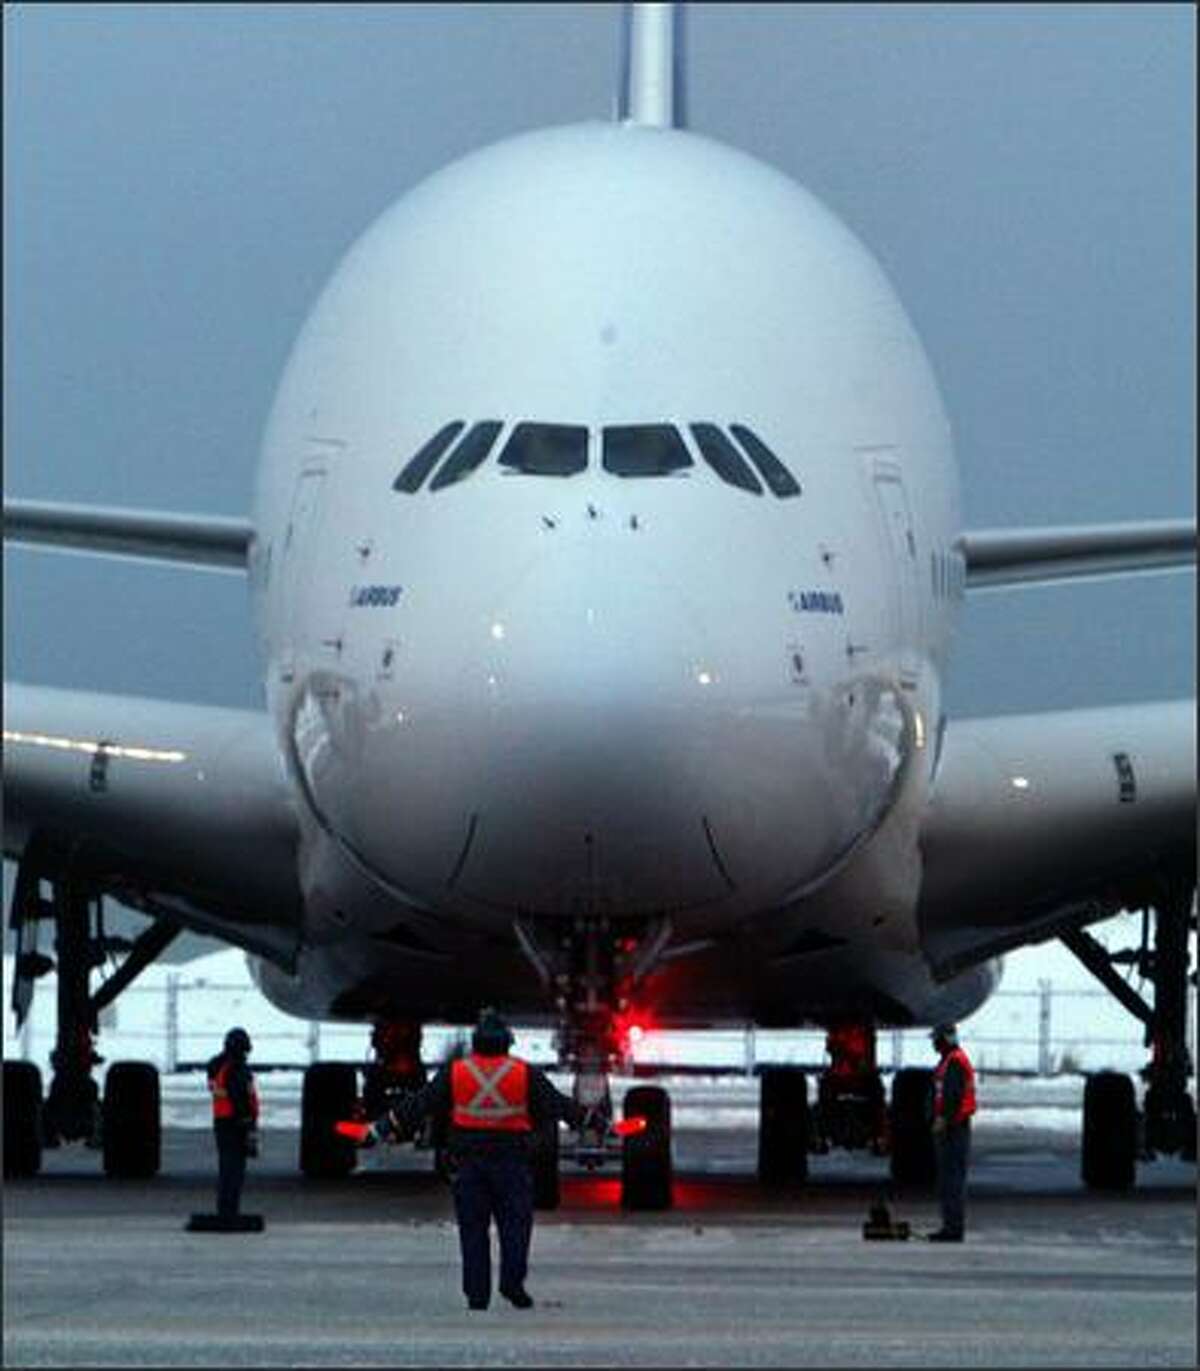 The A380 taxis after landing at Vancouver International Airport in British Columbia.